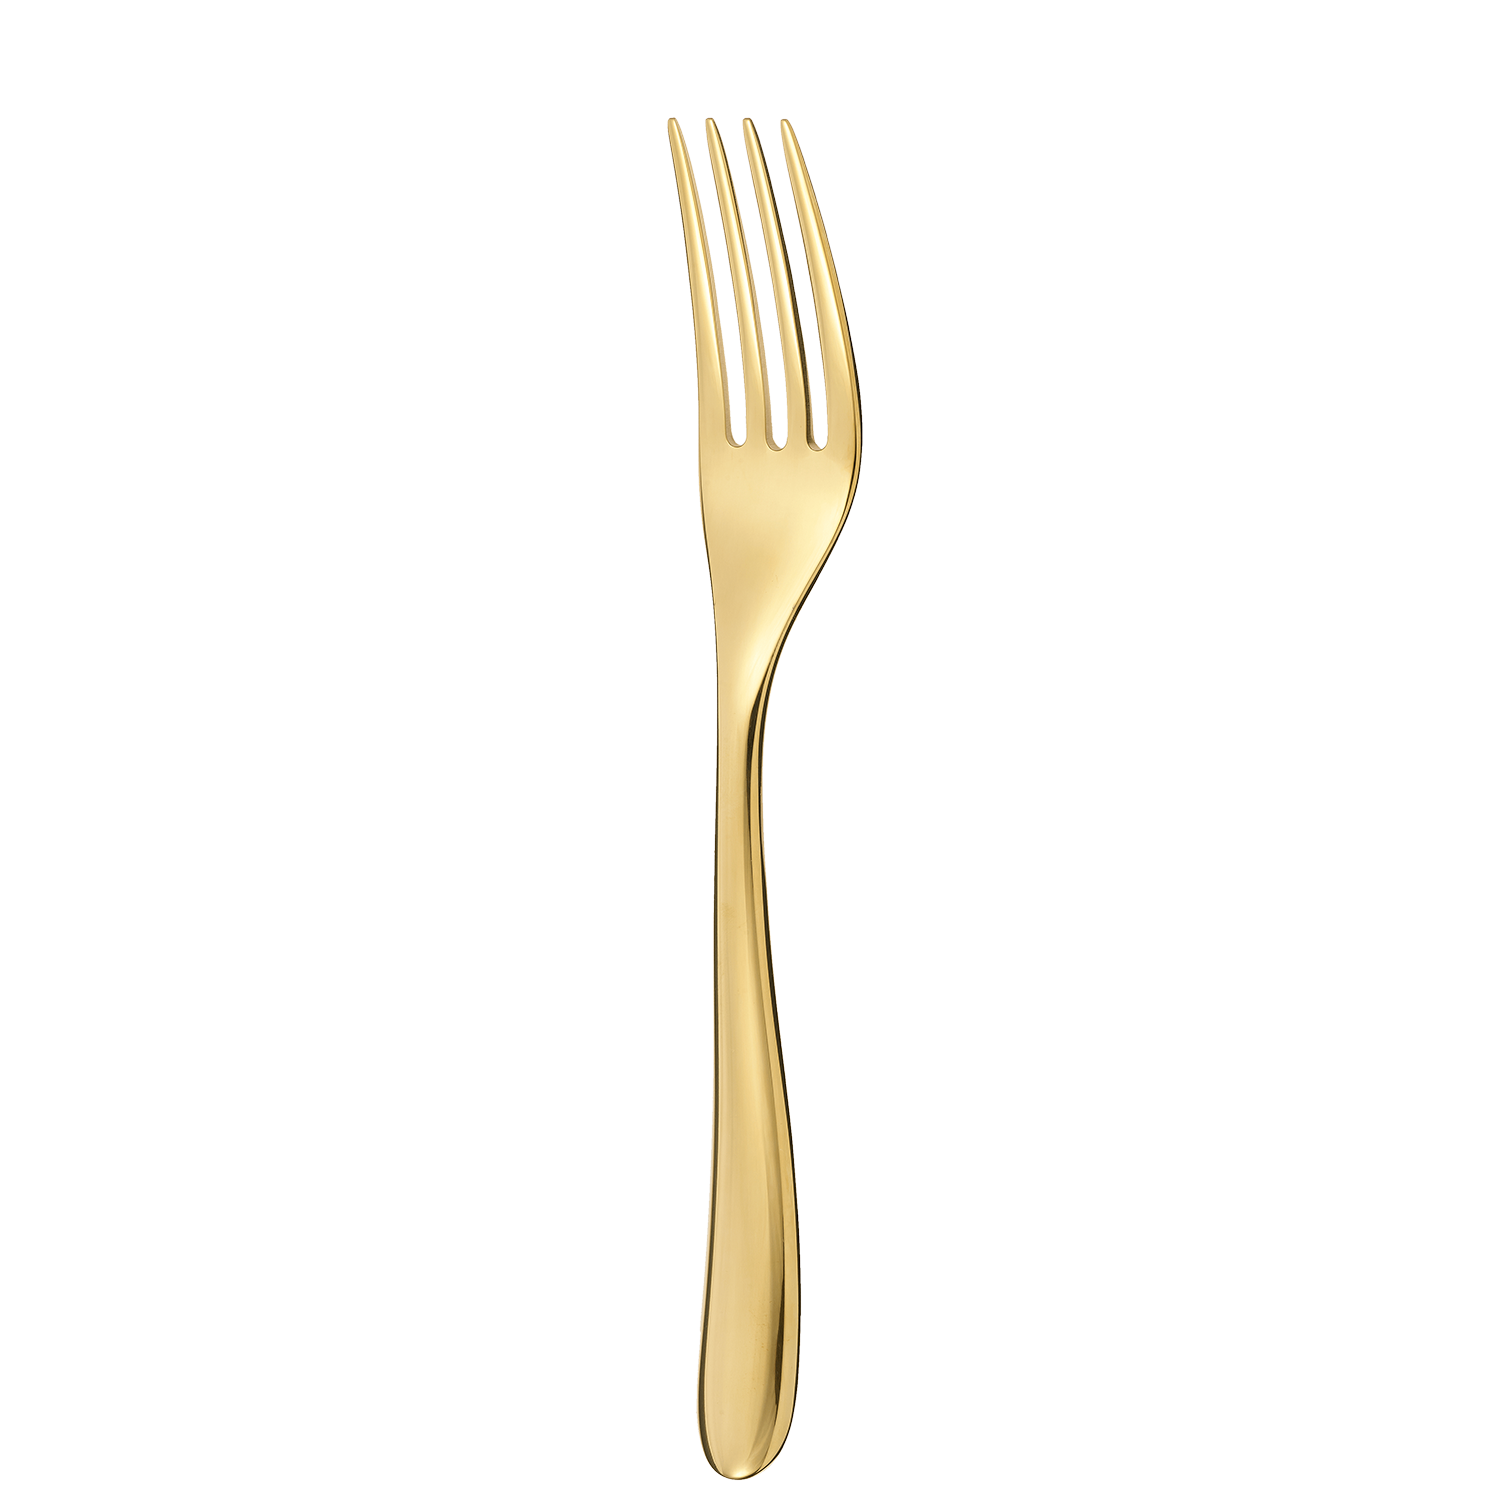 Gold stainless steel table fork